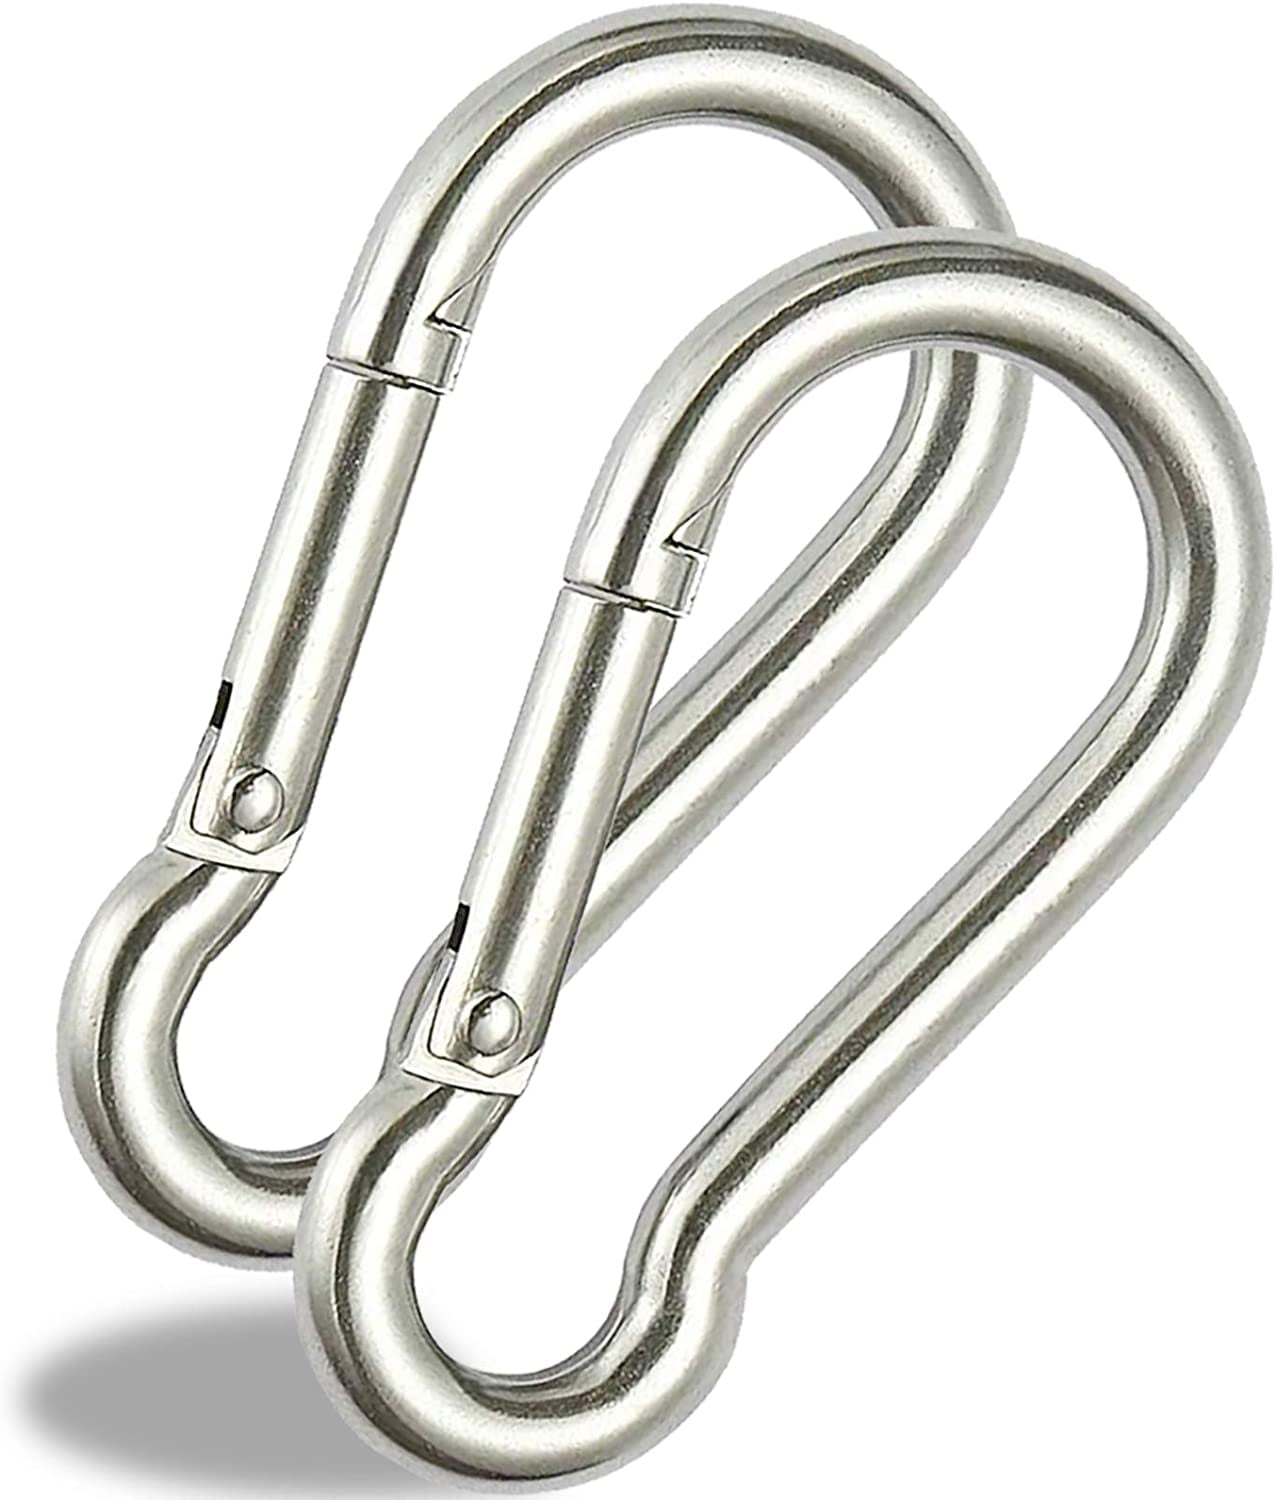 Camping Punching Bags Fishing EFFIET Heavy Duty Spring Snap Hook Clips Spring Link Buckle for Hammock Swing Chairs 3.15 Inches 4 Inches Stainless Steel Carabiner for Gym Equipment Connection Hiking 